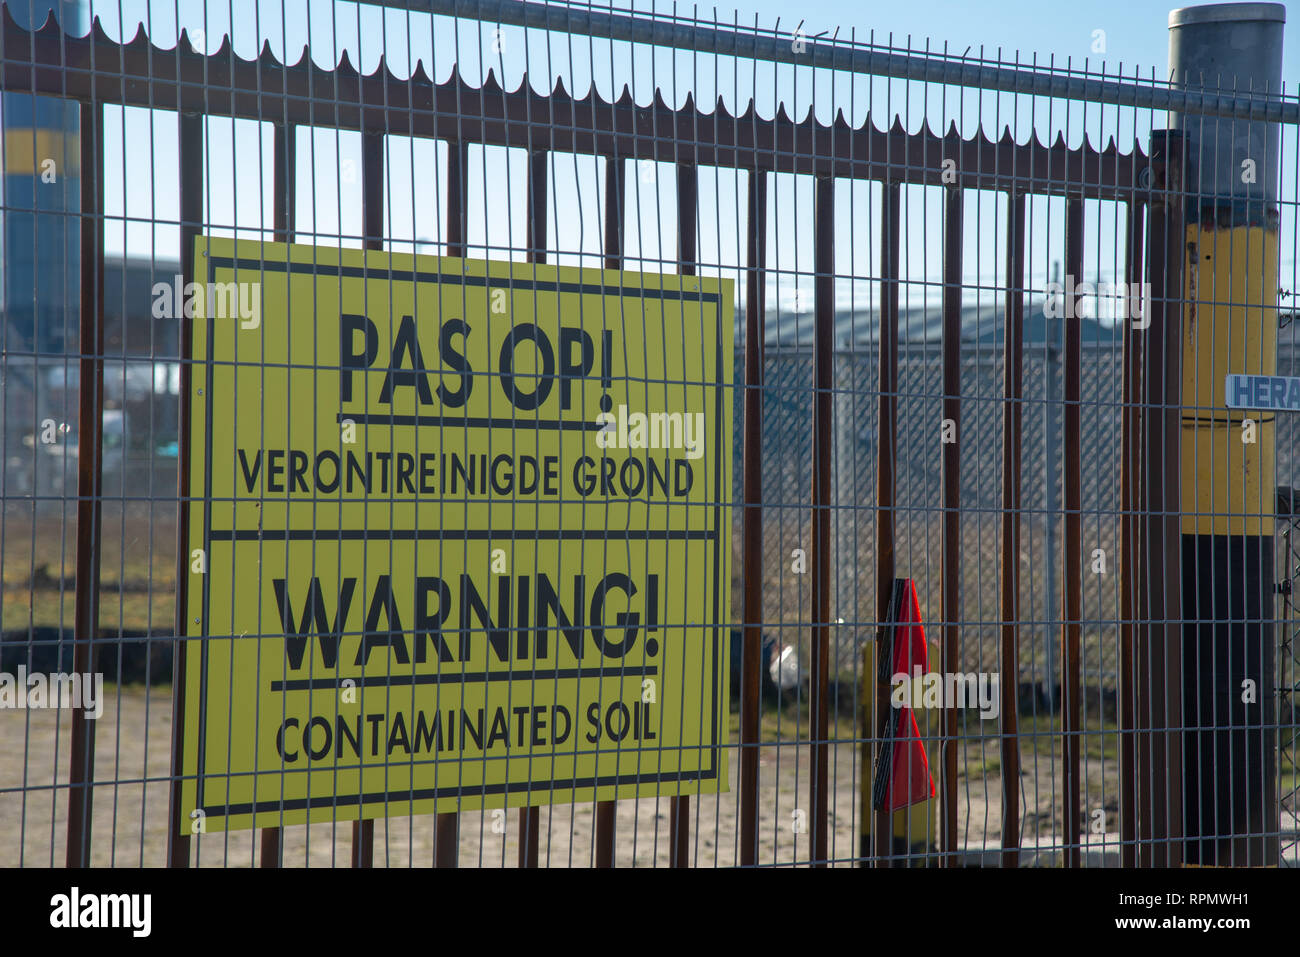 warning sign for contaminated soil Stock Photo